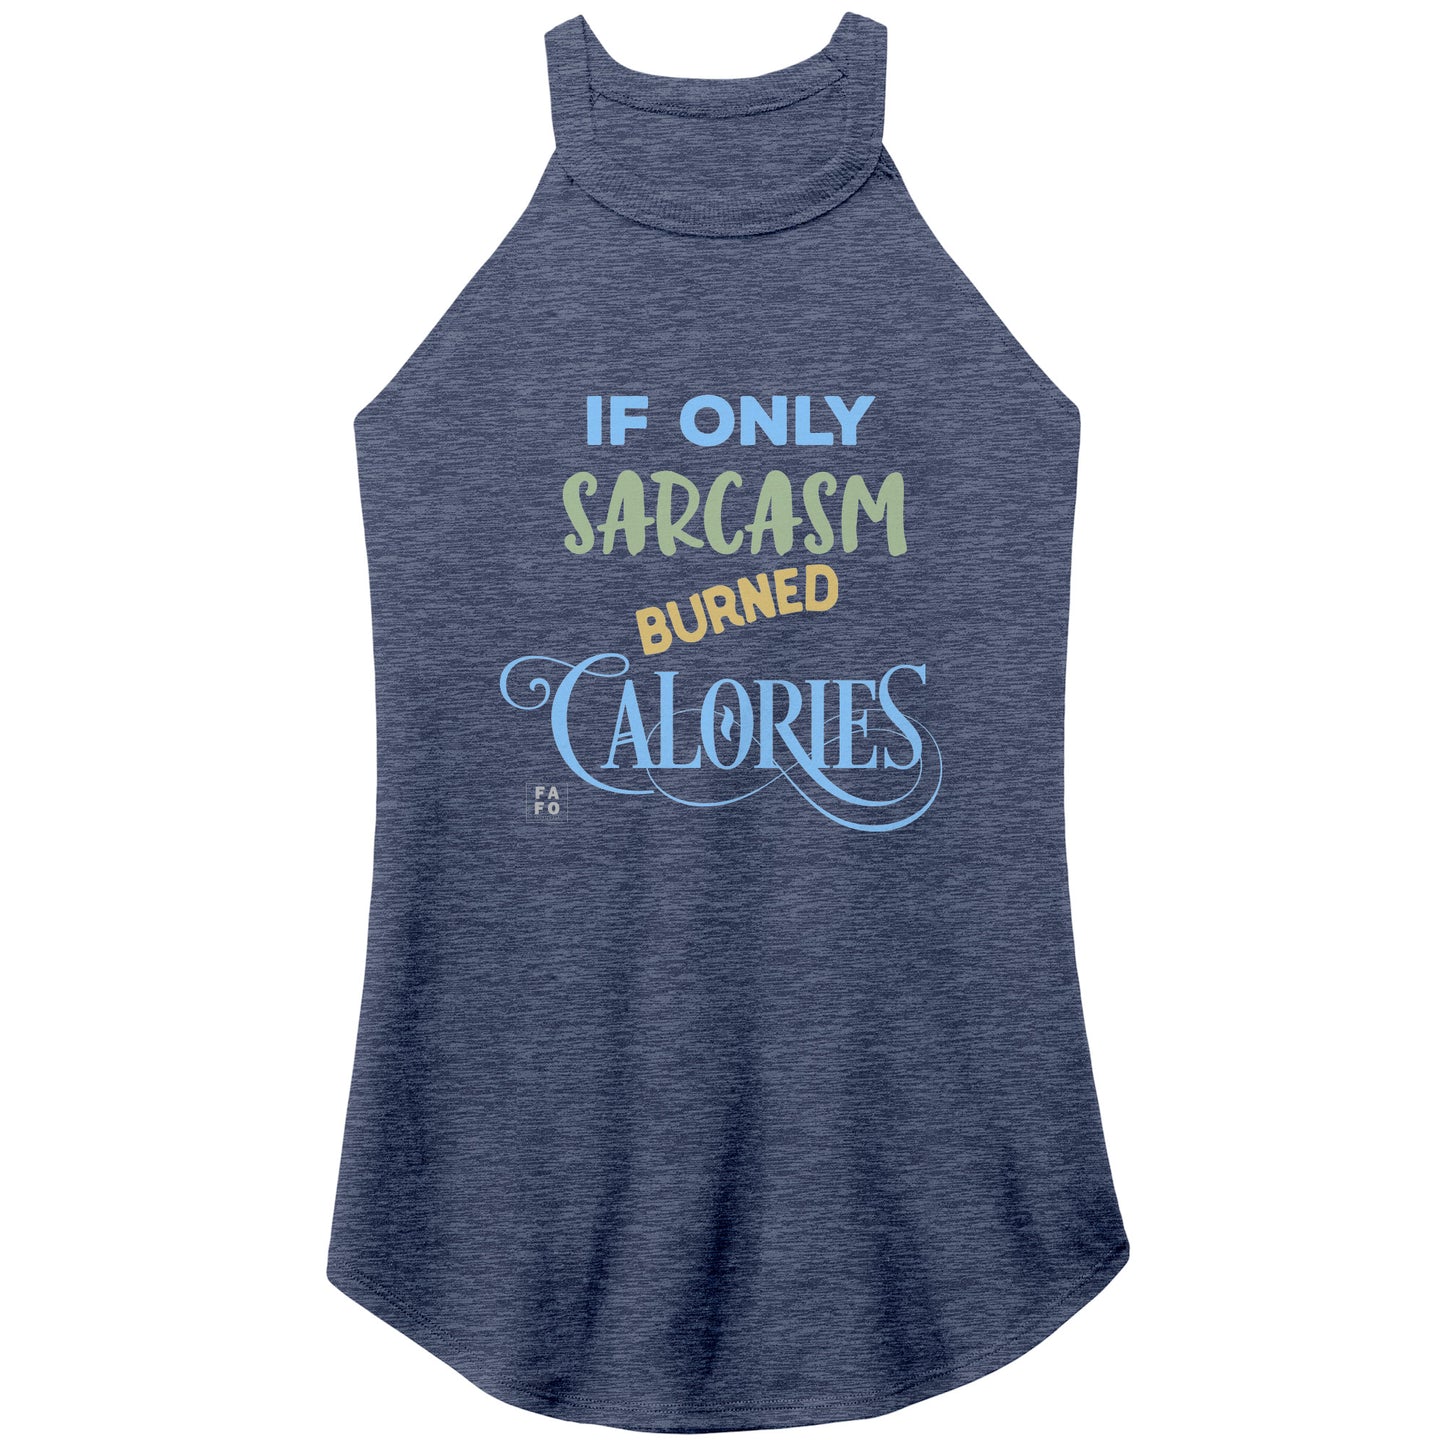 Womens Rocker Tank - If Only Sarcasm Burned Calories - Blue